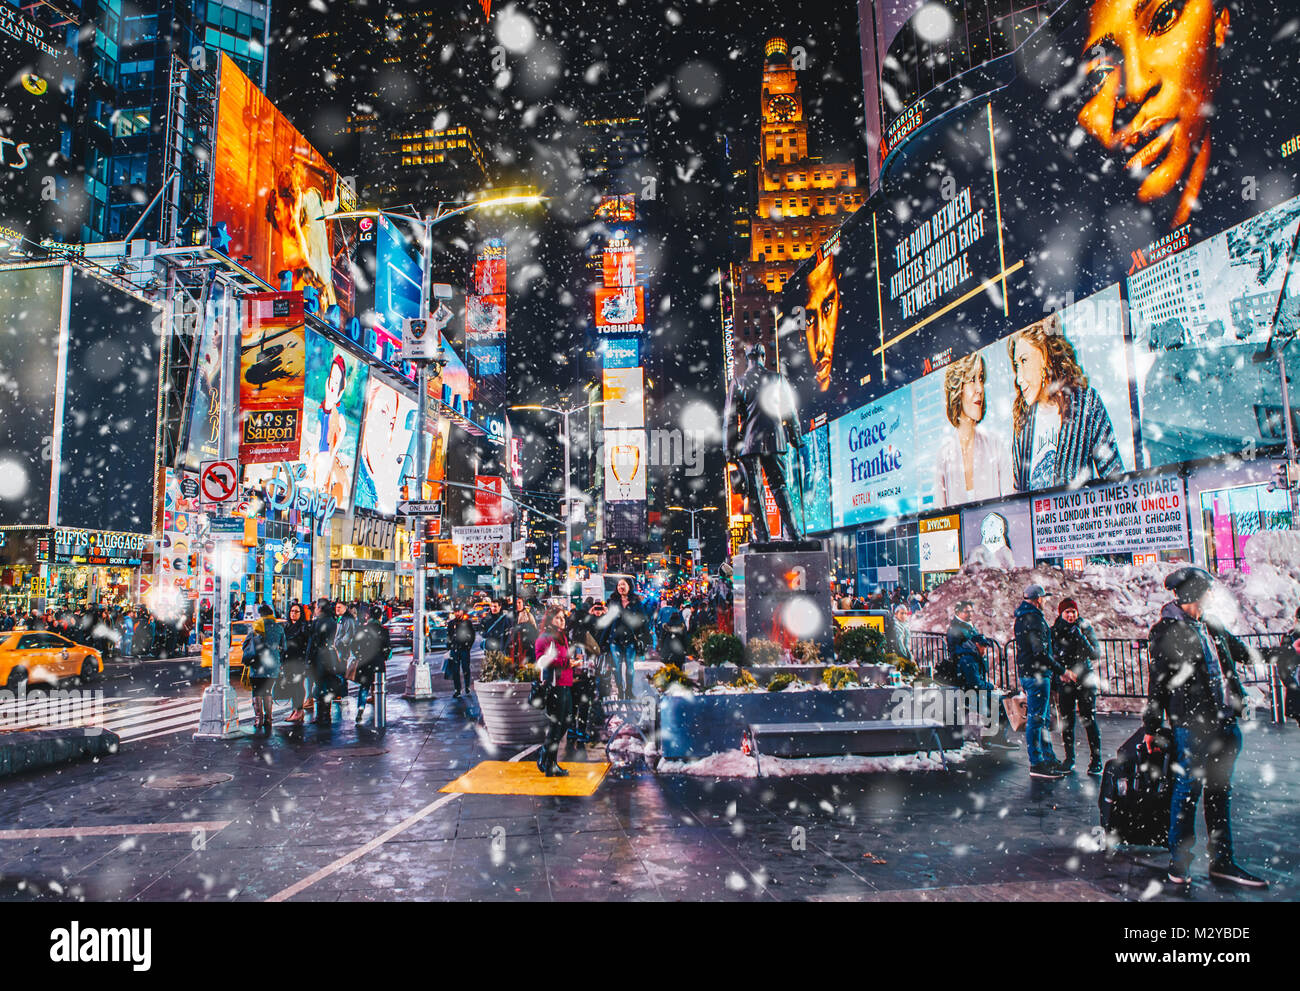 New York City, USA - March 18, 2017: People and famous led advertising panels in Times Square during snow, one of the  symbol of New York City. Stock Photo